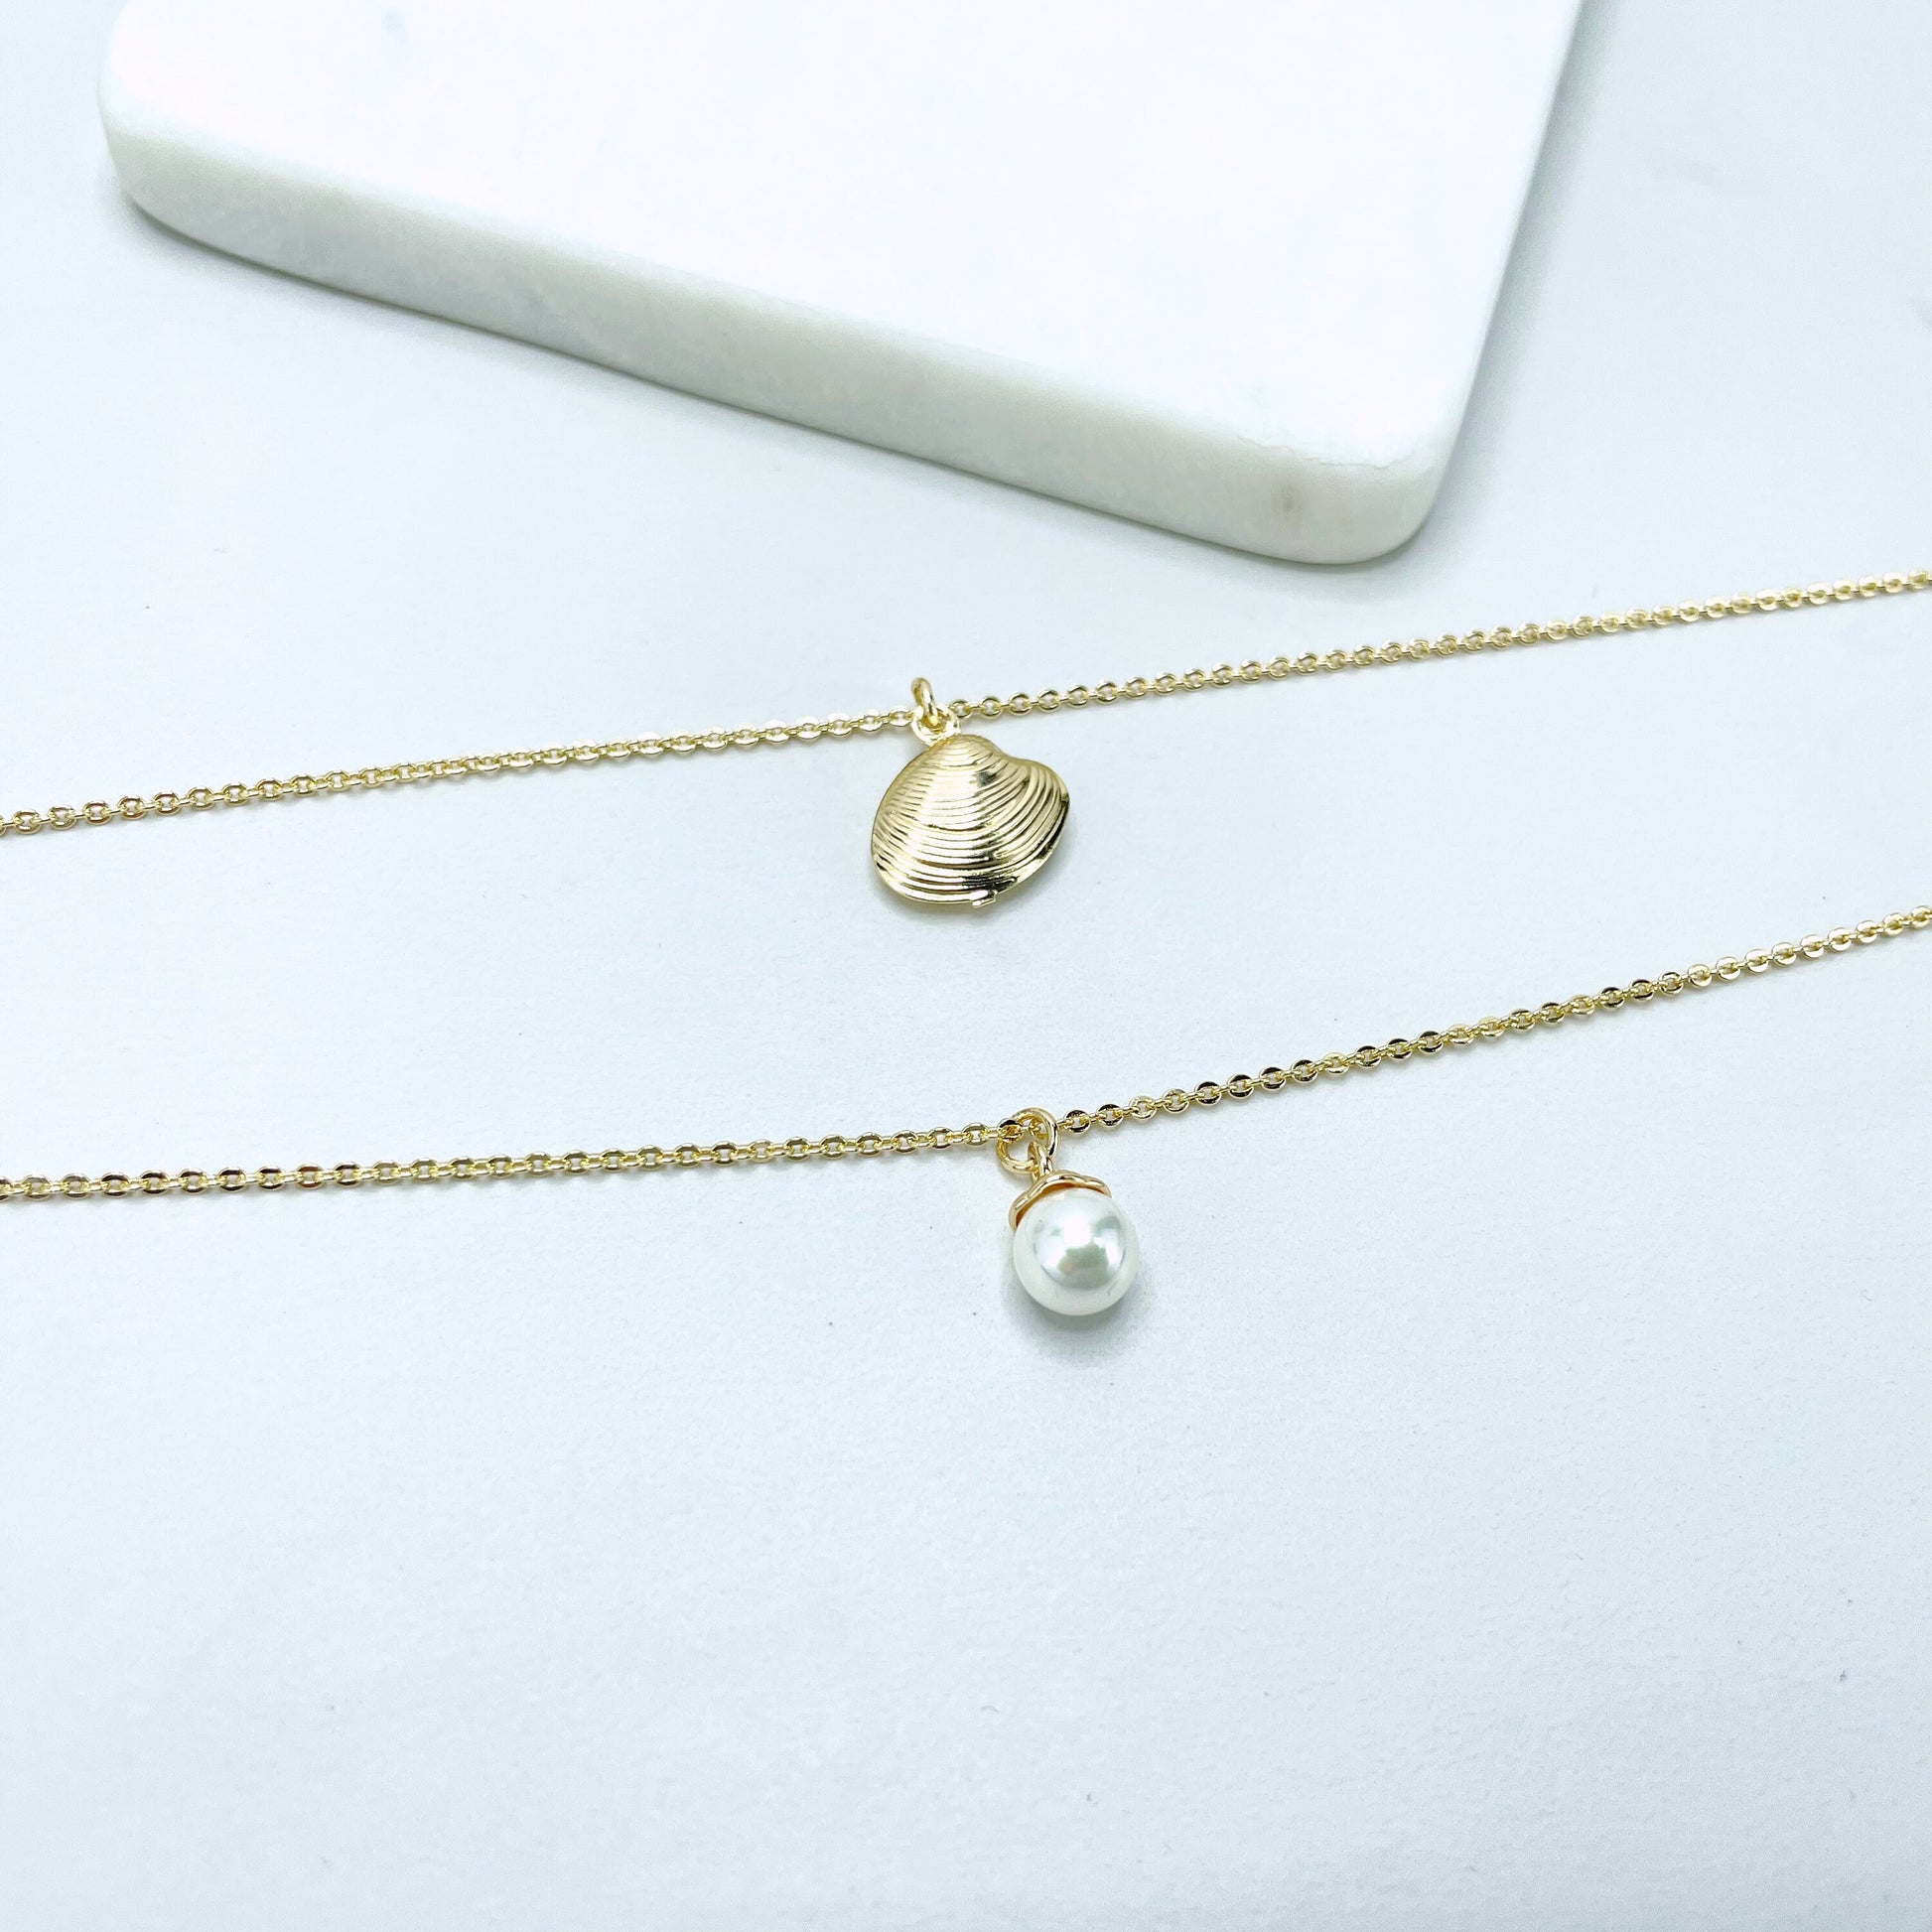 18k Gold Filled Double 2mm Rolo Link Necklaces with Gold Shell & Simulated Pearl, 02 Necklace Wholesale Jewelry Making Supplies